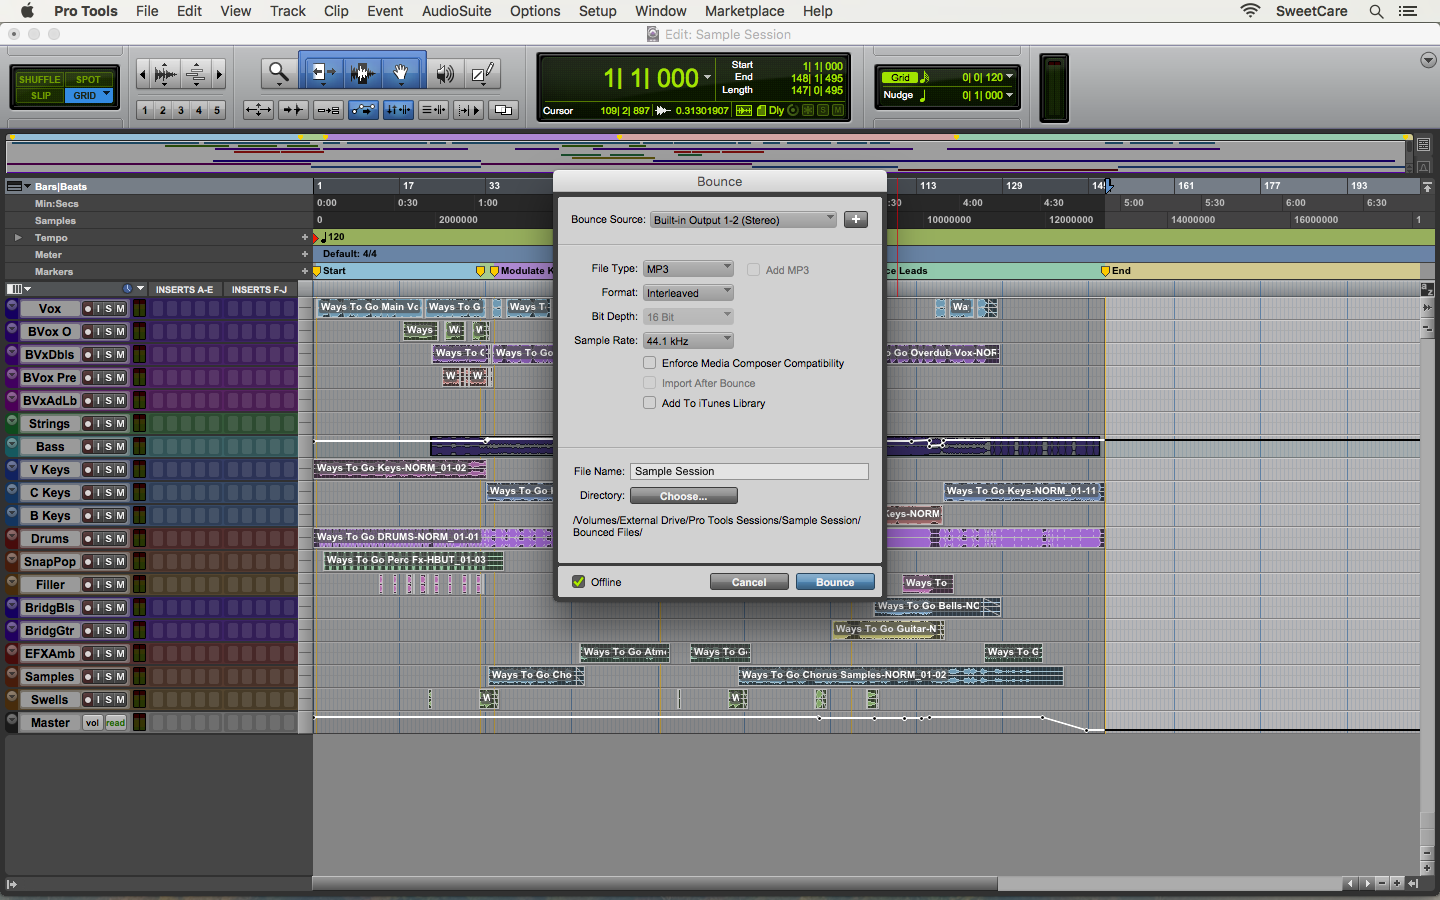 How To Bounce A Mix In Pro Tools - OBEDIA, Music Recording Software  Training And Support For Home Studio